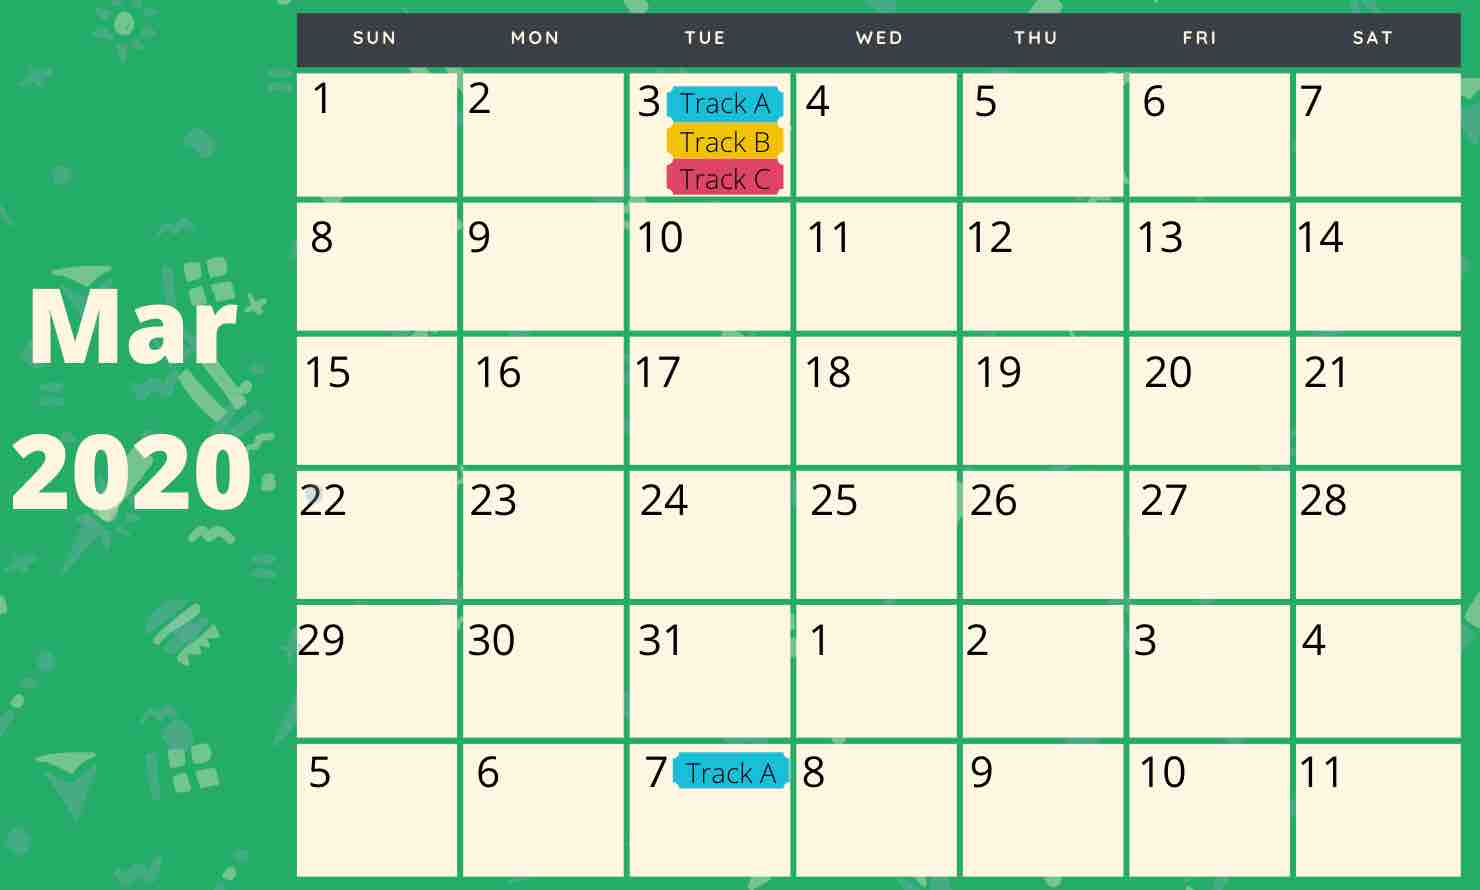 Calendar view of the first month on a monthly sending schedule